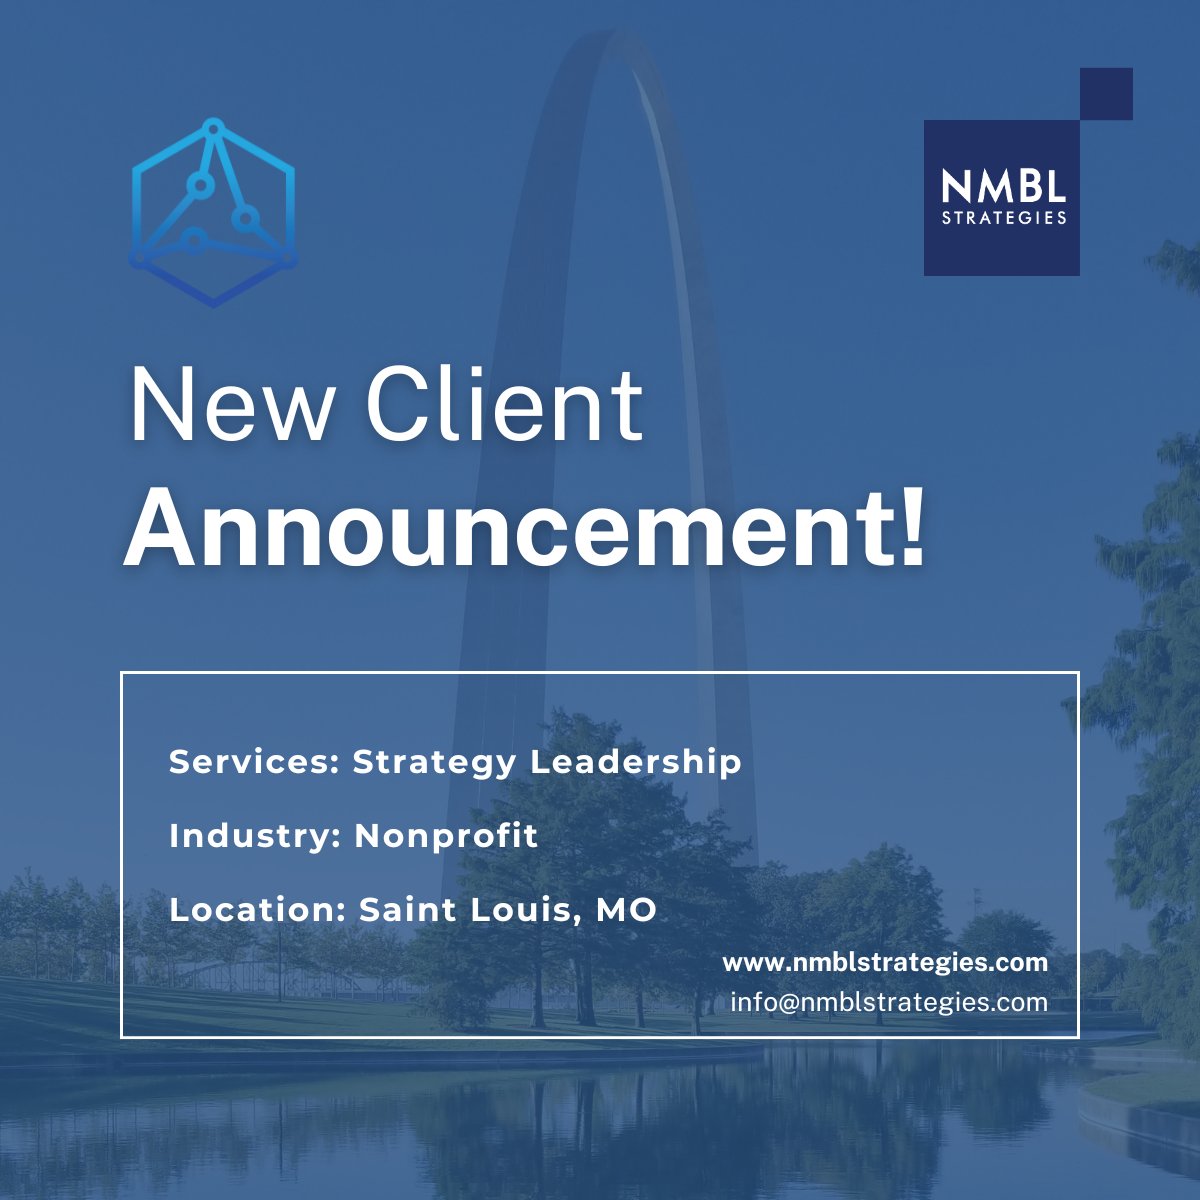 It's a busy time for us in the #nonprofit space.  We're excited to be working locally with a group on their #strategicplan.  

Learn more about our #strategicplanning approach at nmblstrategies.com/strategic-plan…

#nonprofits #strategy #nonprofitstrategy #nonprofitleader #leadership